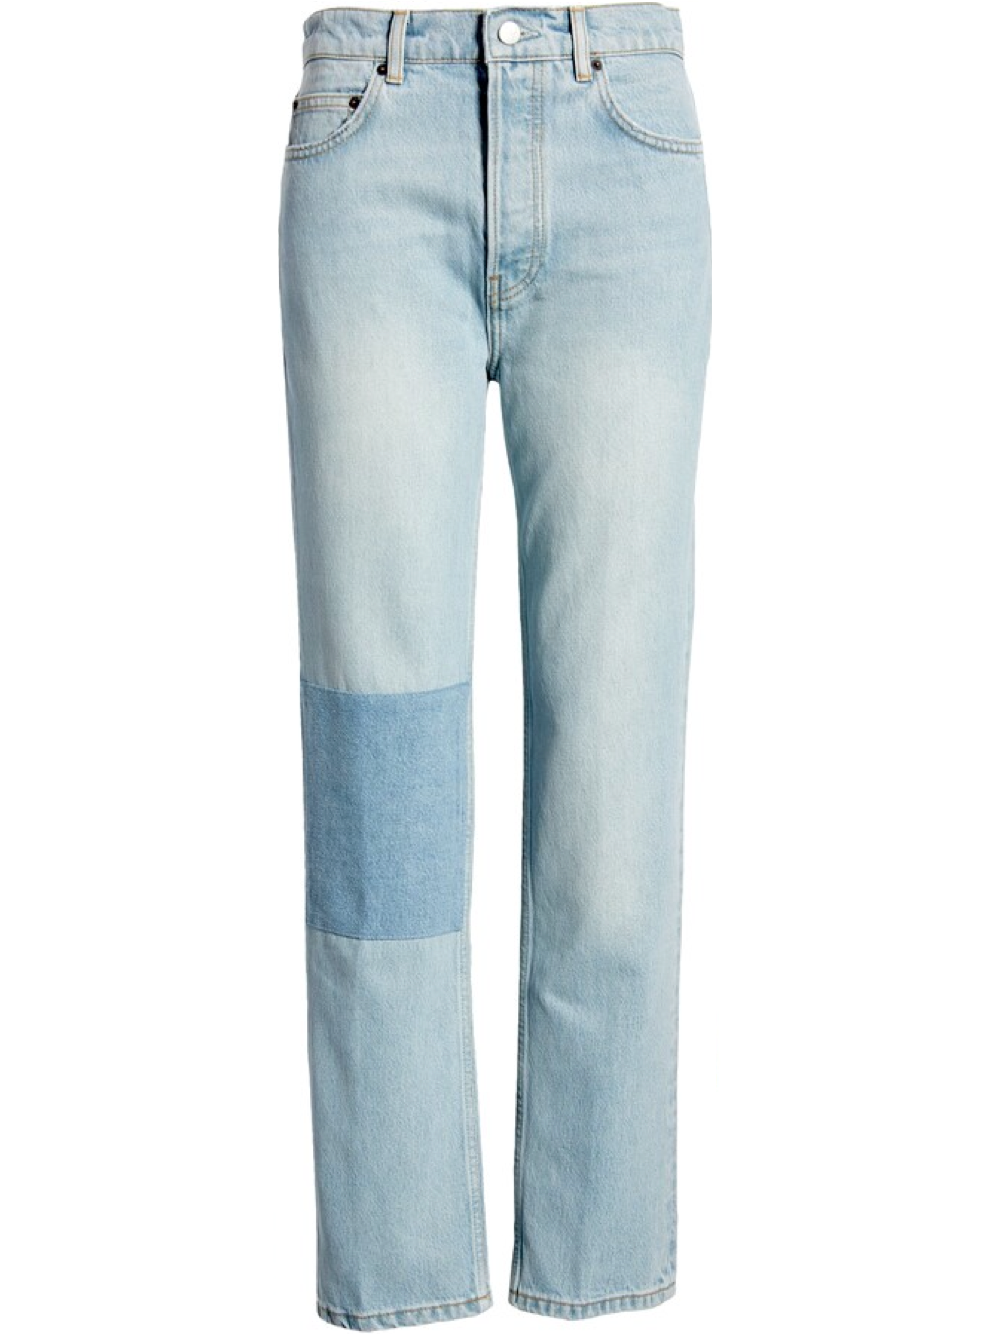 Reformation The Cynthia Patch High Rise Straight Jeans